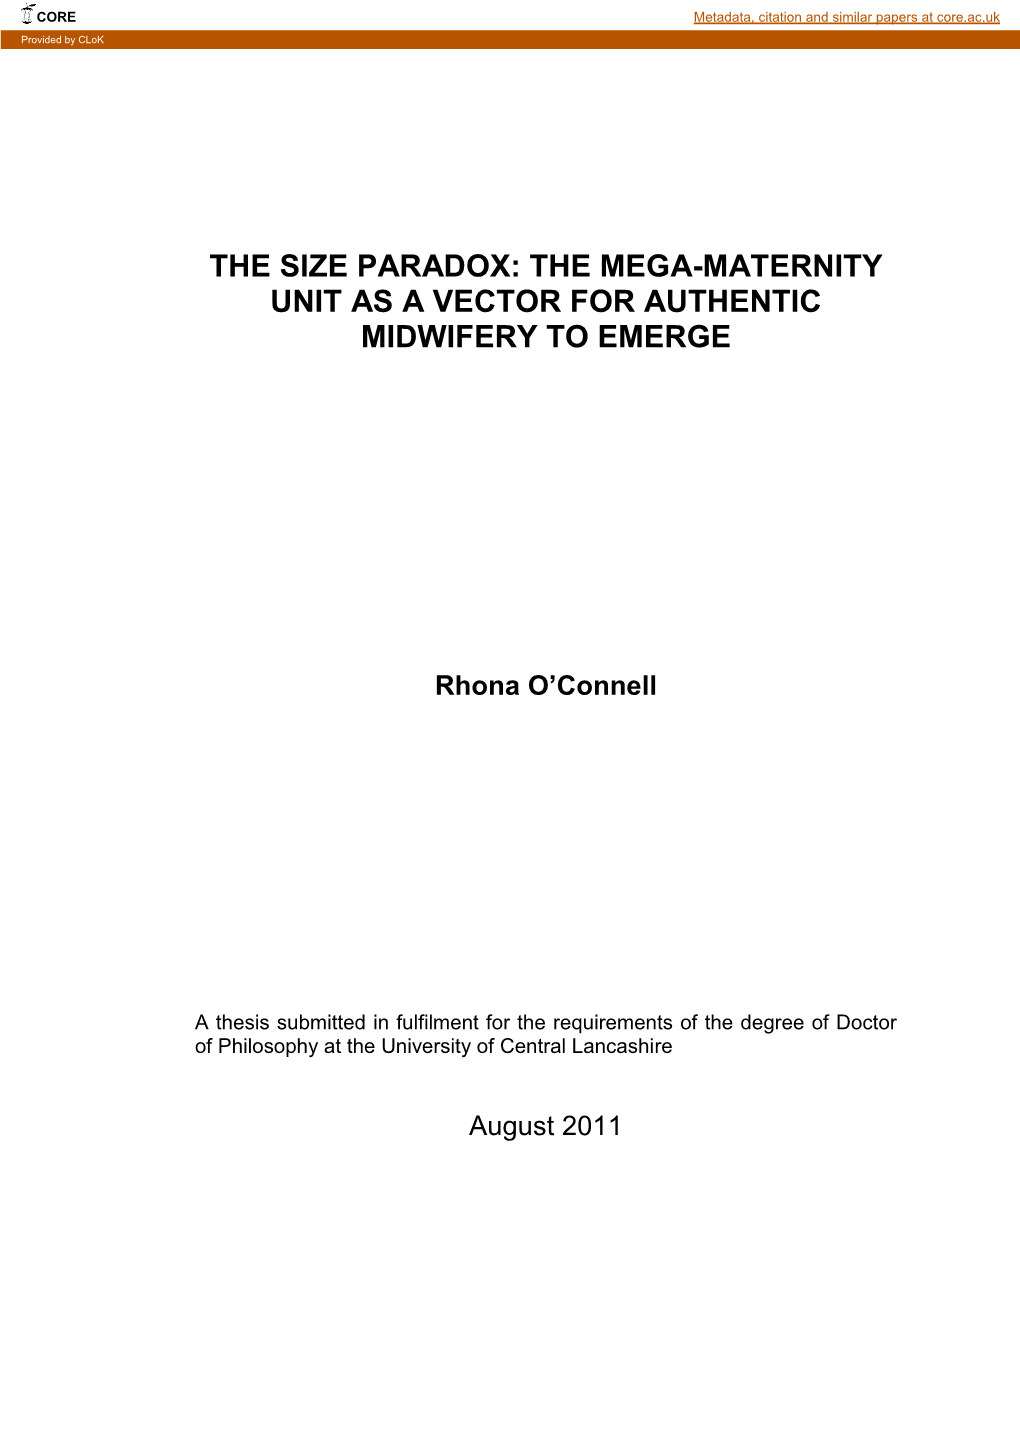 The Size Paradox: the Mega-Maternity Unit As a Vector for Authentic Midwifery to Emerge